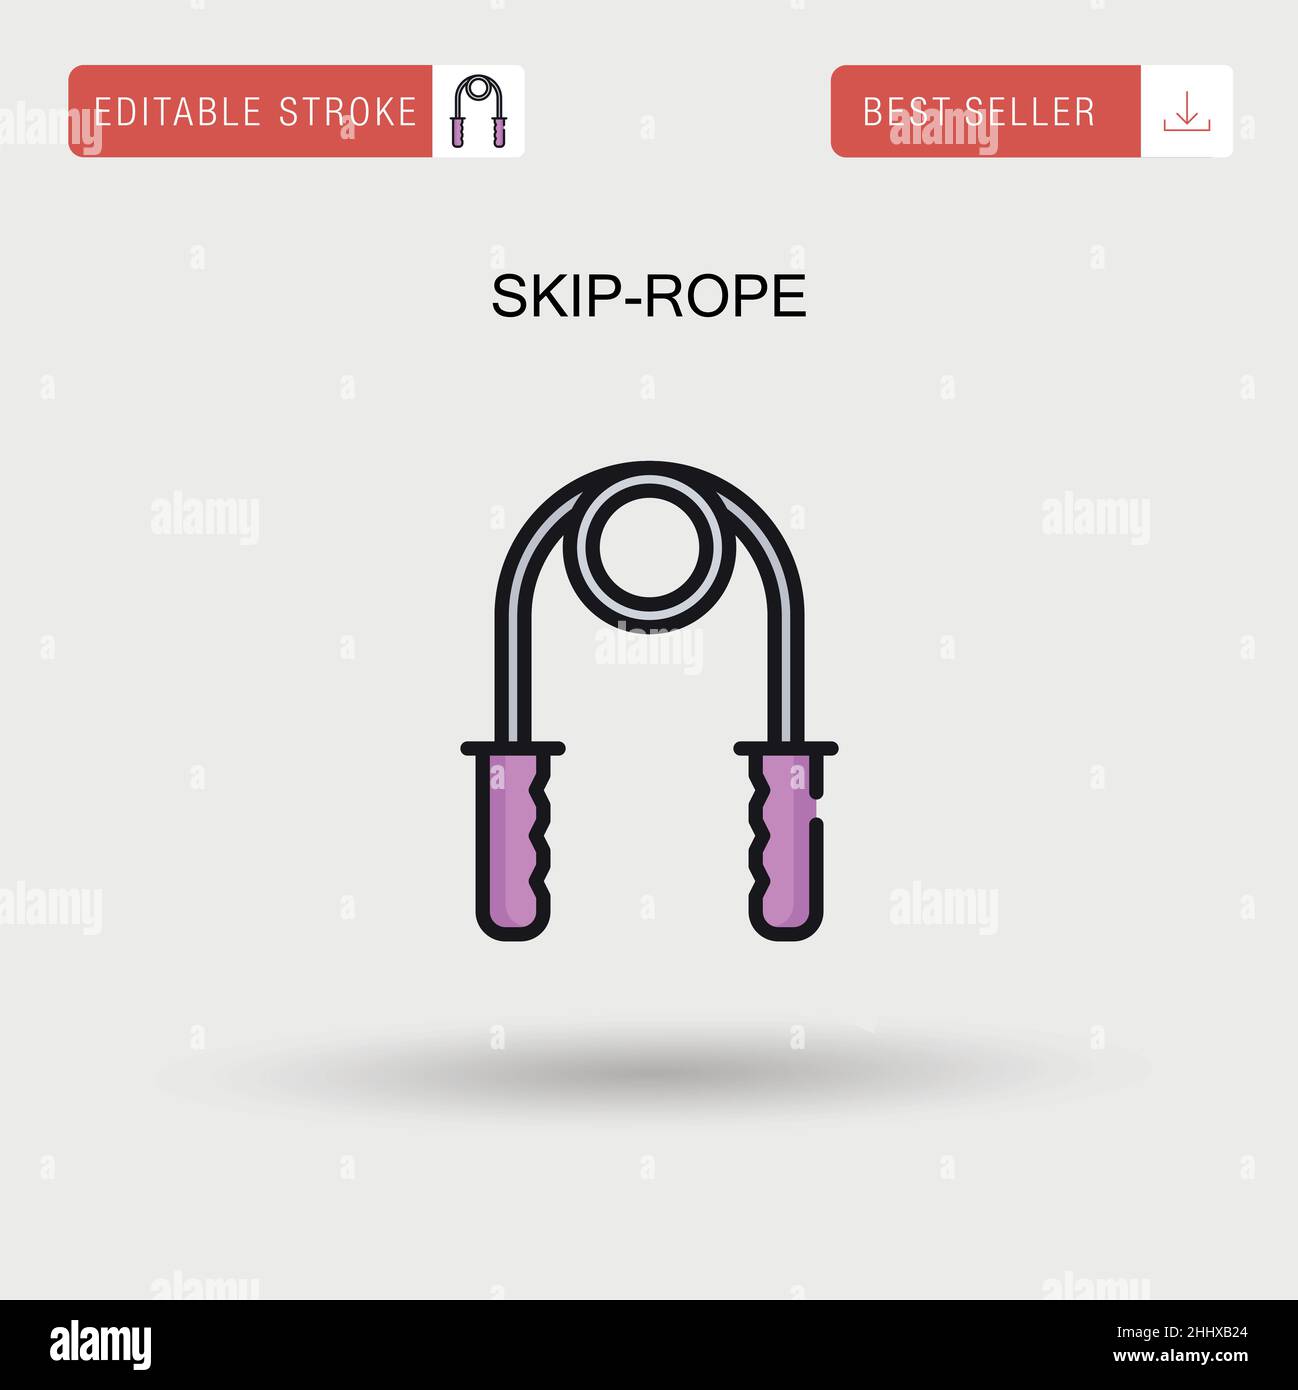 Skip-rope Simple vector icon. Stock Vector